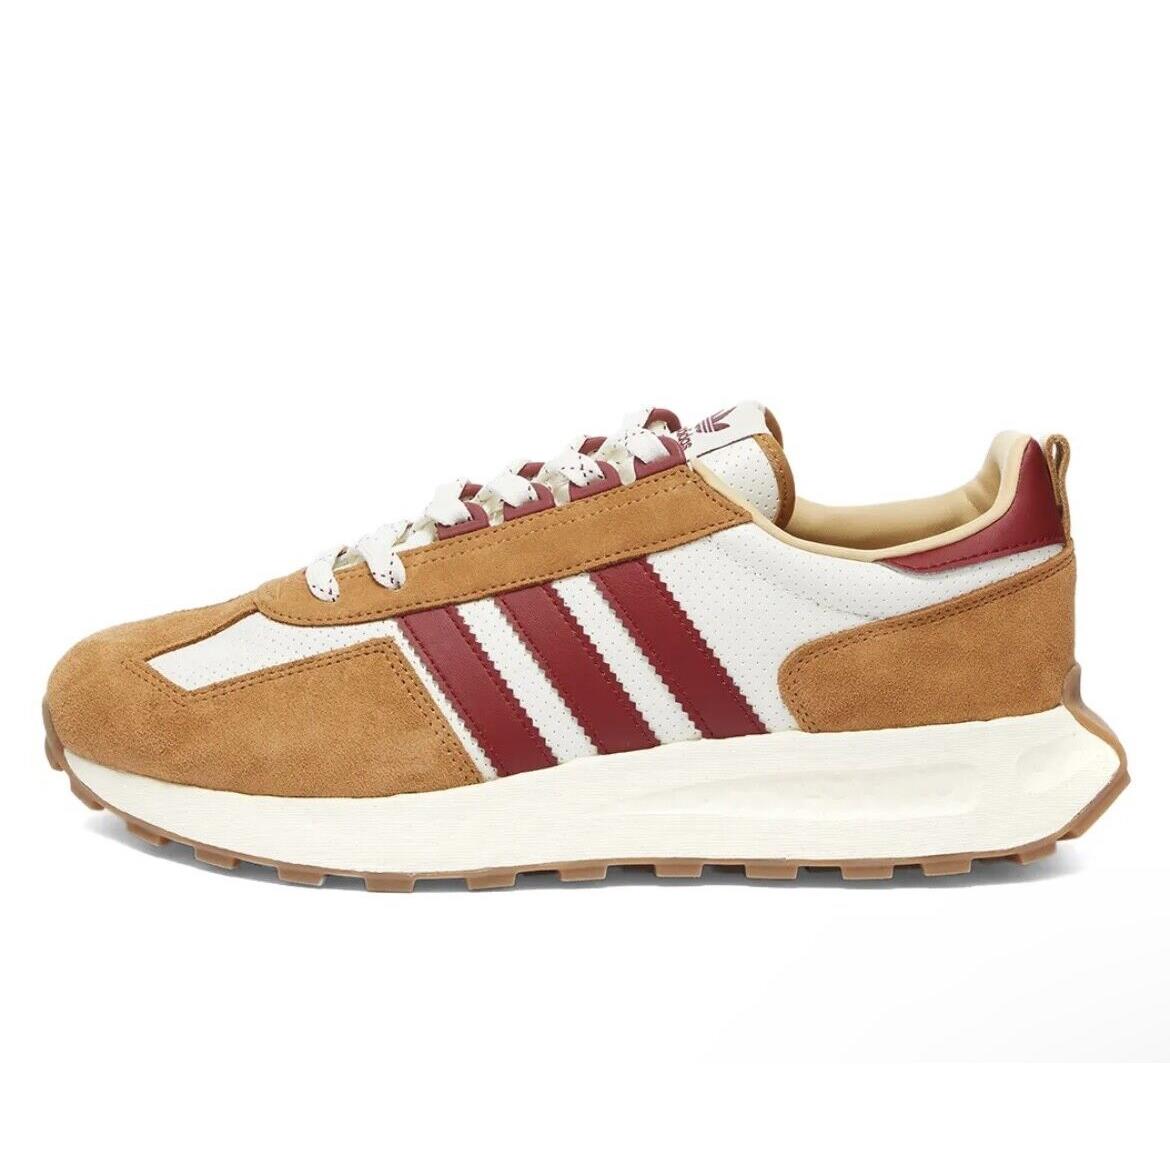 Adidas shoes Retropy - White Red Brown Beige 5